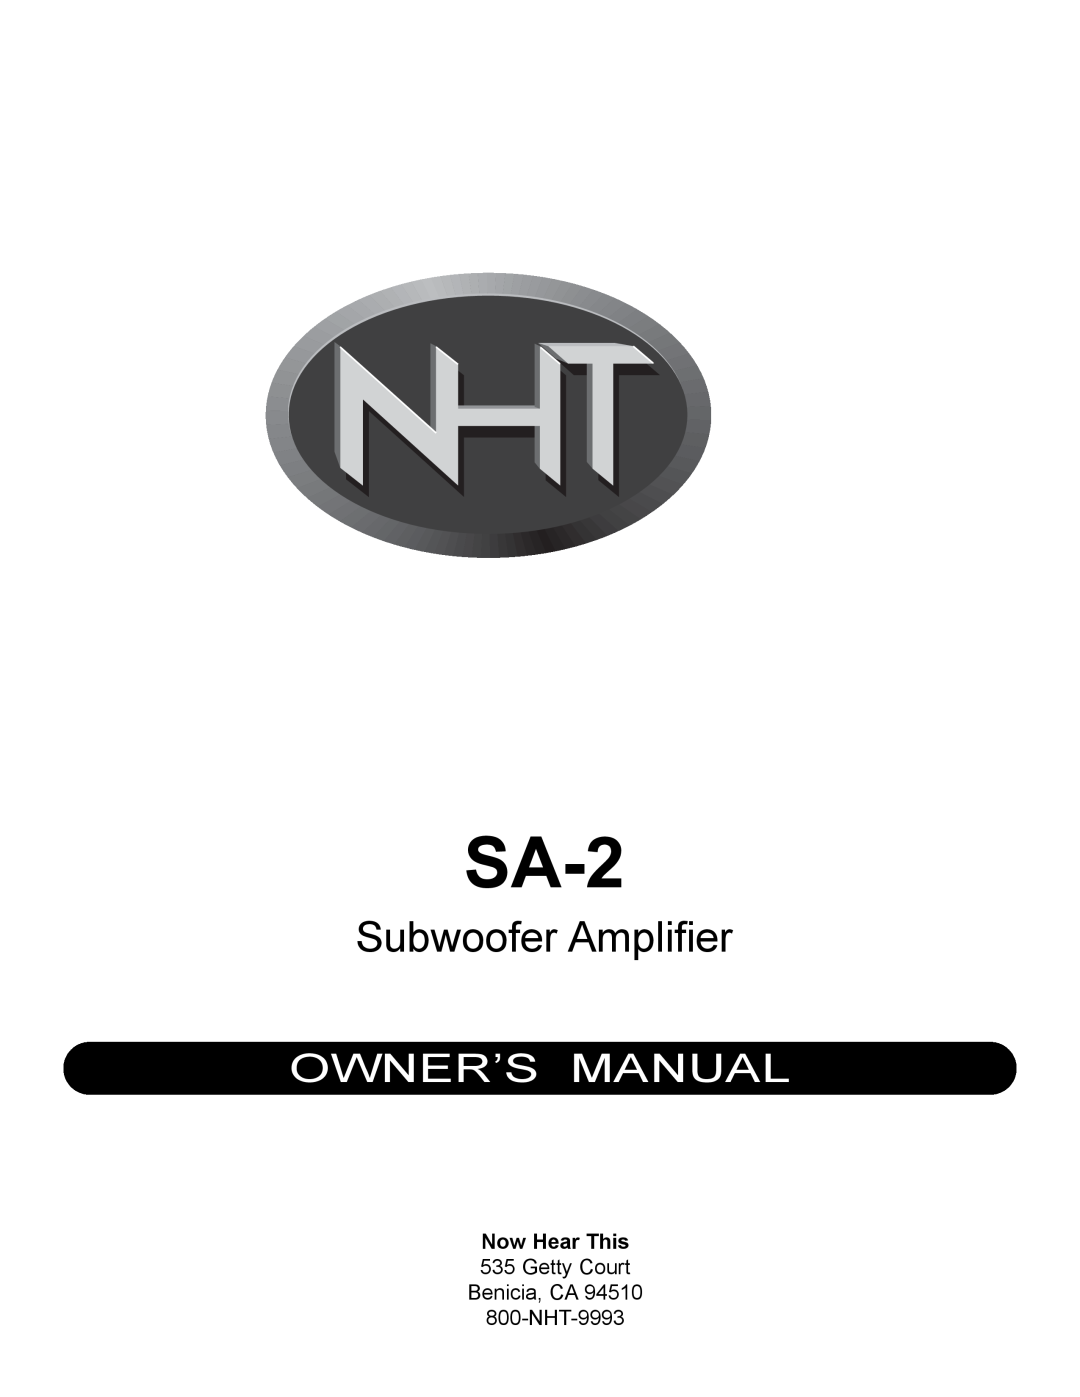 NHT SA-2 owner manual Subwoofer Amplifier, Now Hear This 